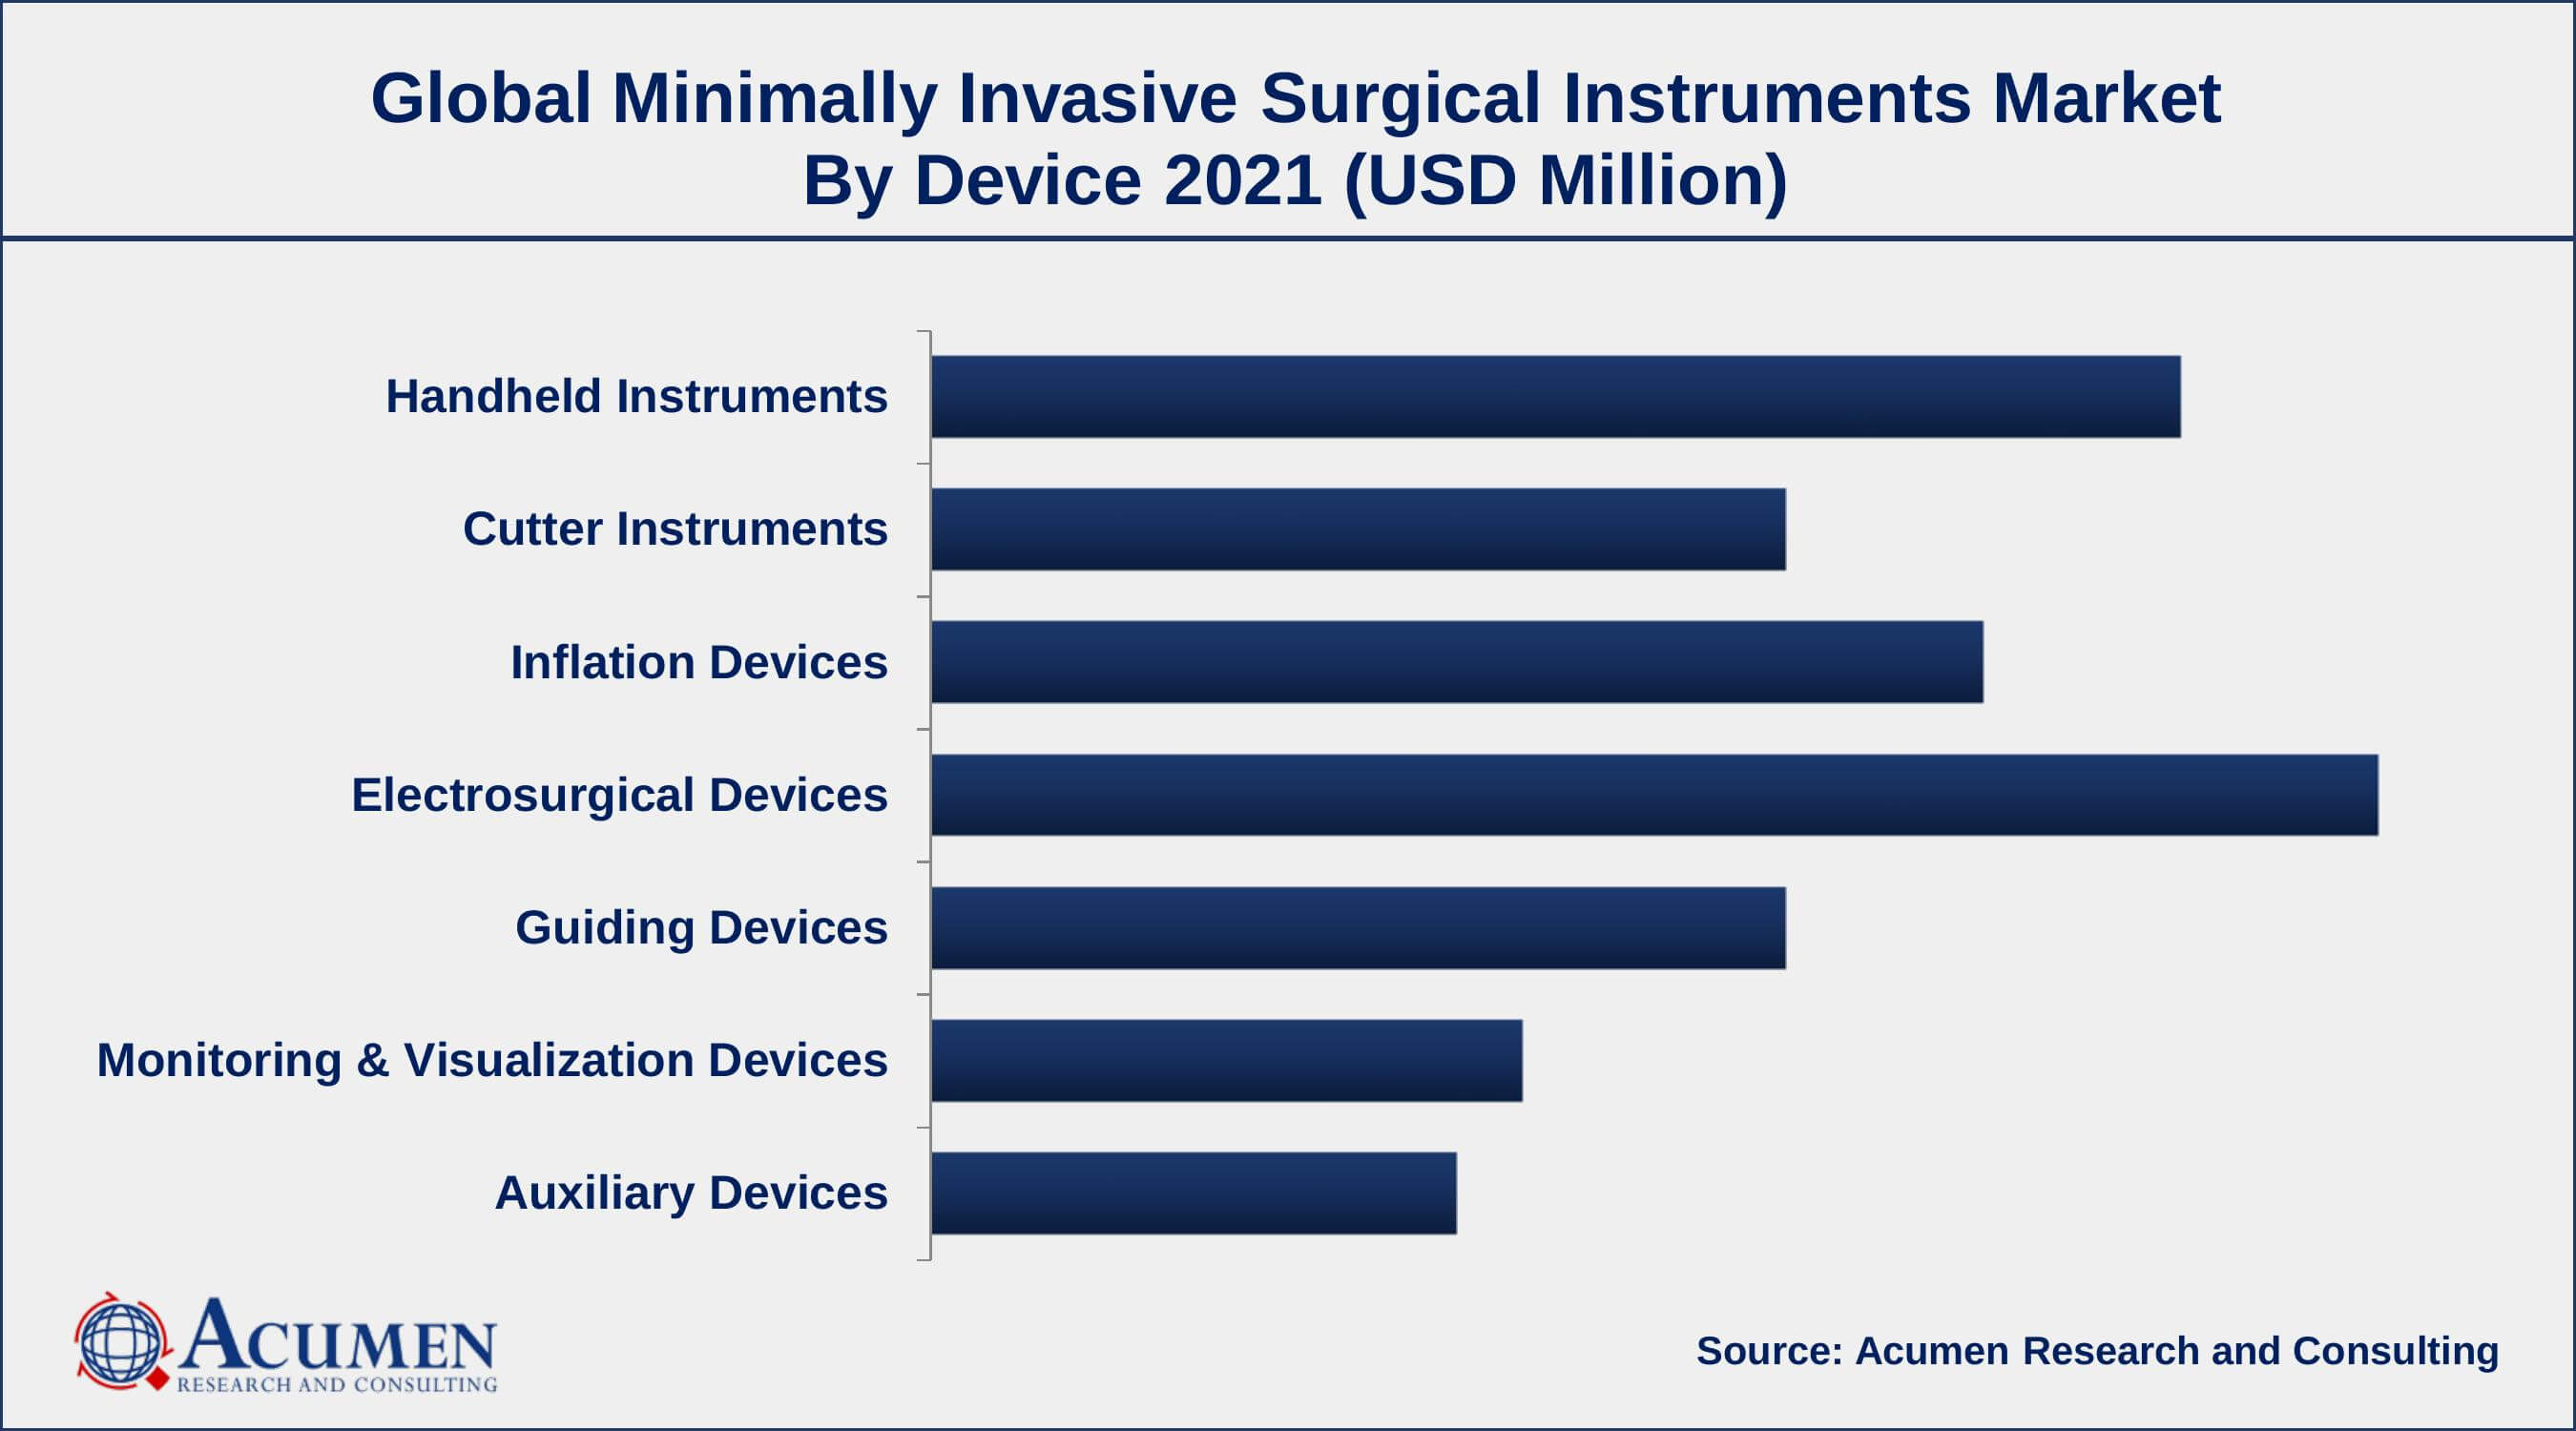 By device, the handheld instruments segment has accounted market share of over 22.1% in 2021